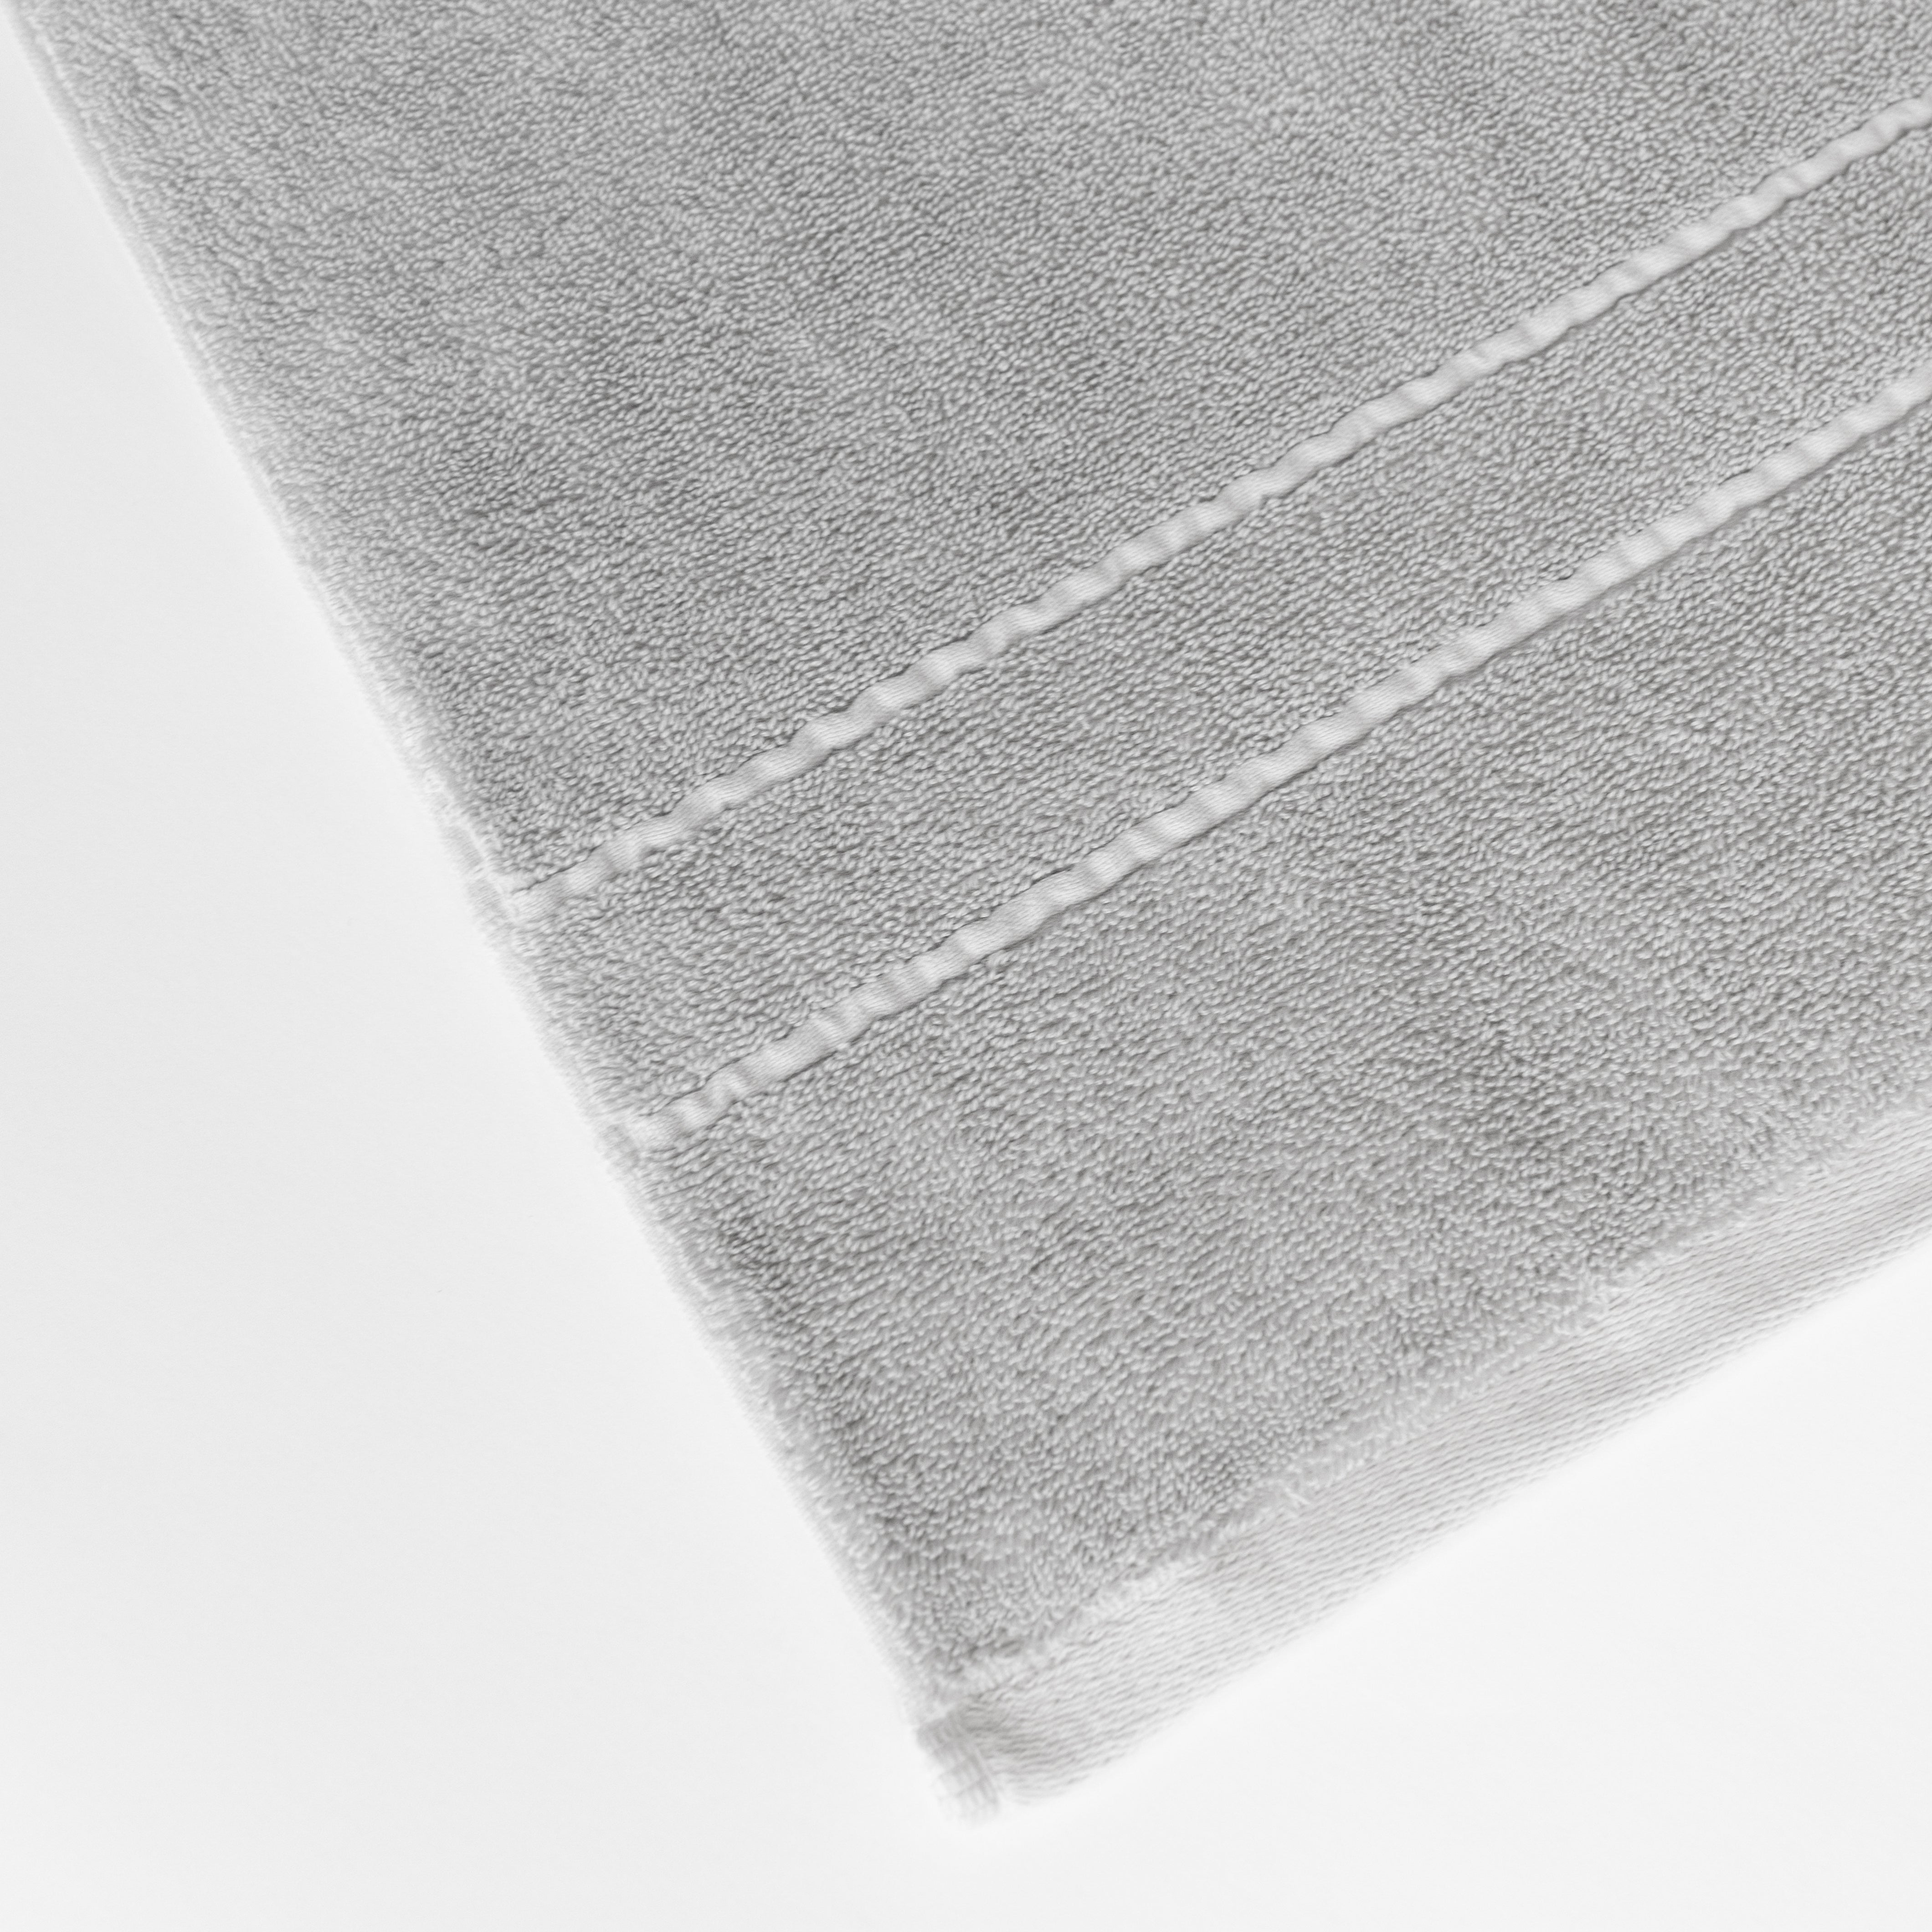 Premium Plush Bath Towels in the color Light Grey. Photo of Premium Plush Bath Towels taken on a white background showing only the corner of the towel. |Color: Light Grey